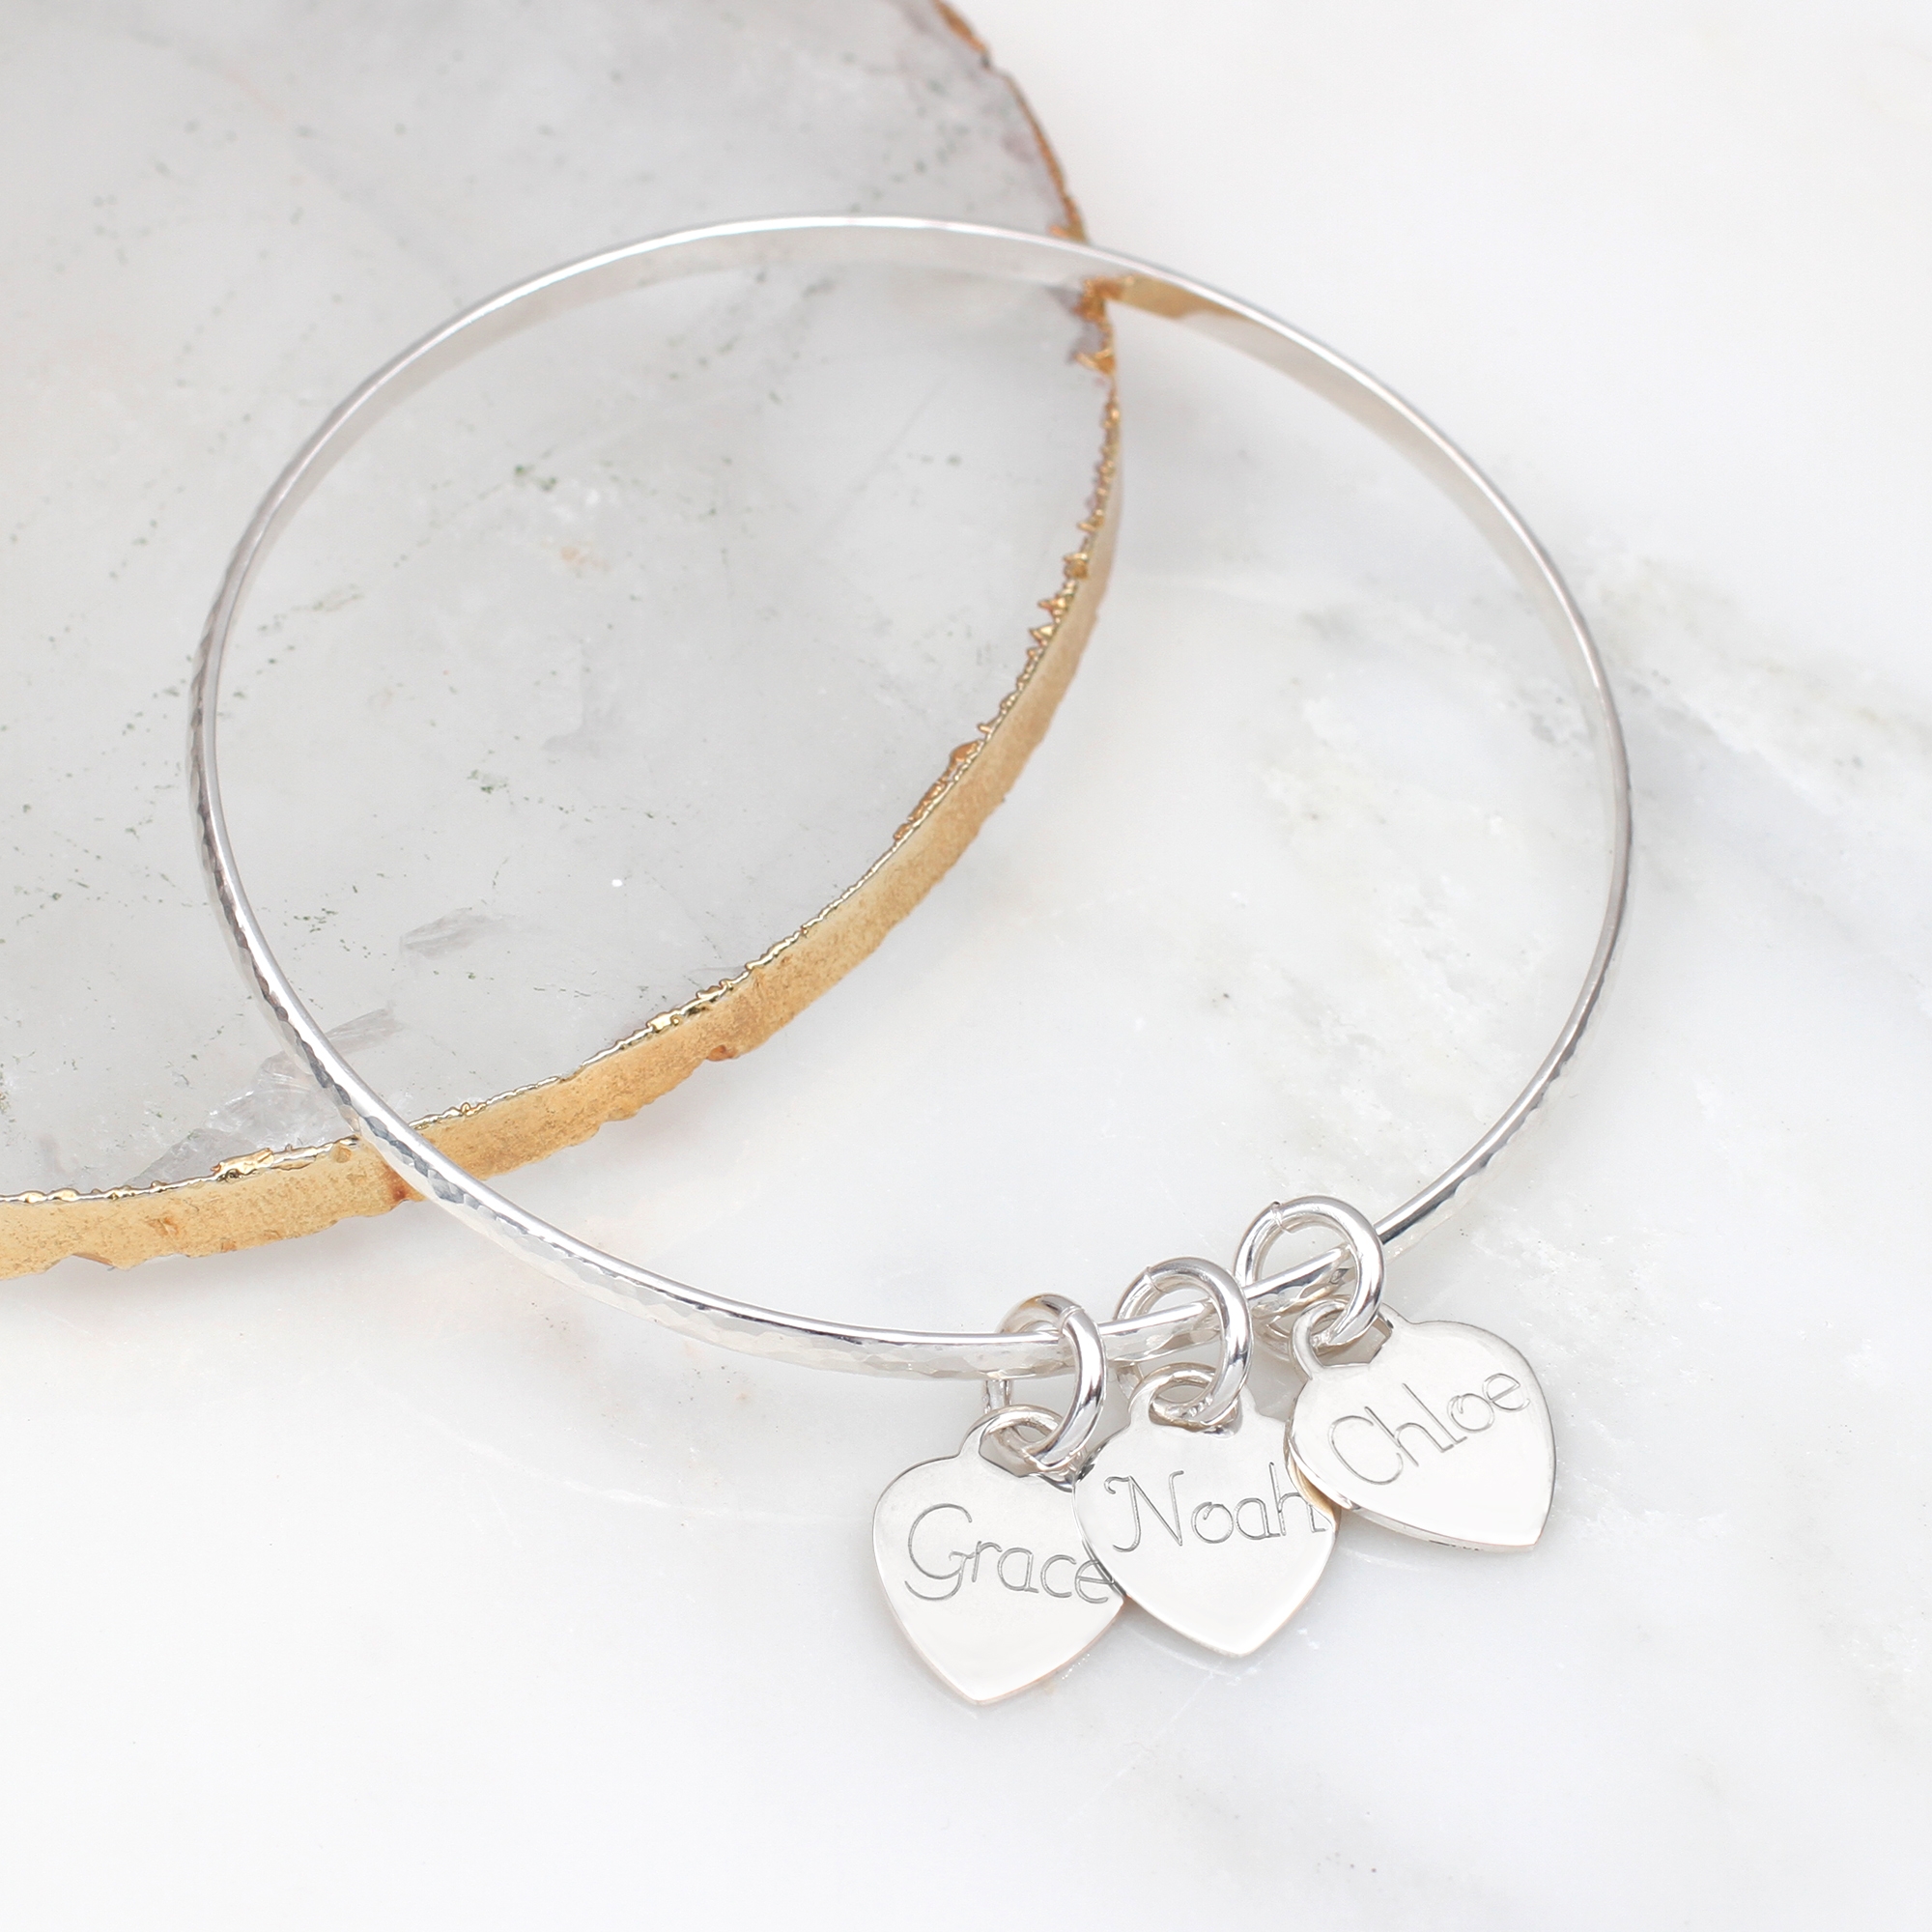 Personalised Sterling Silver Loved Ones Heart Bangle – Hurley Burley